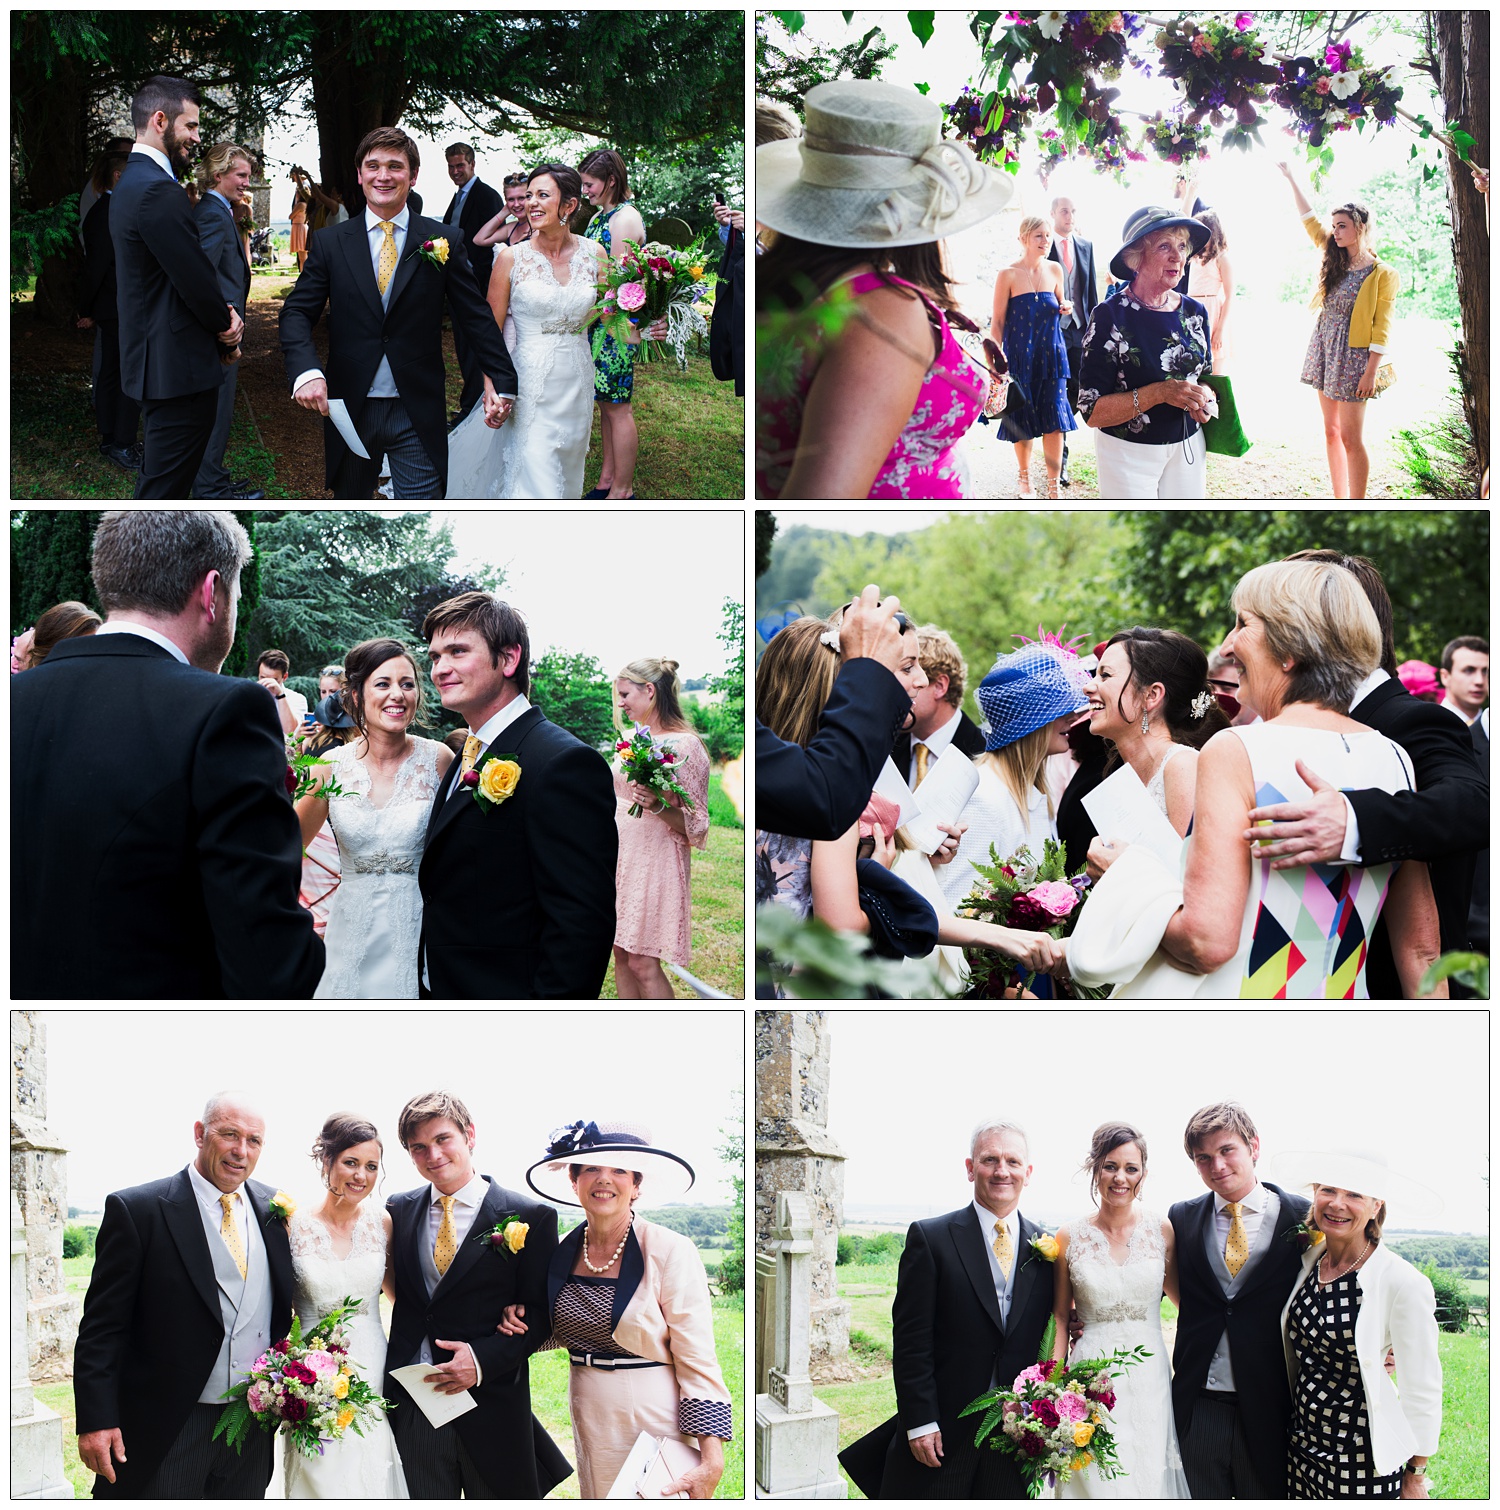 Wedding photographs of people outside The Church of St Mary & St Margaret in Stow Maries.